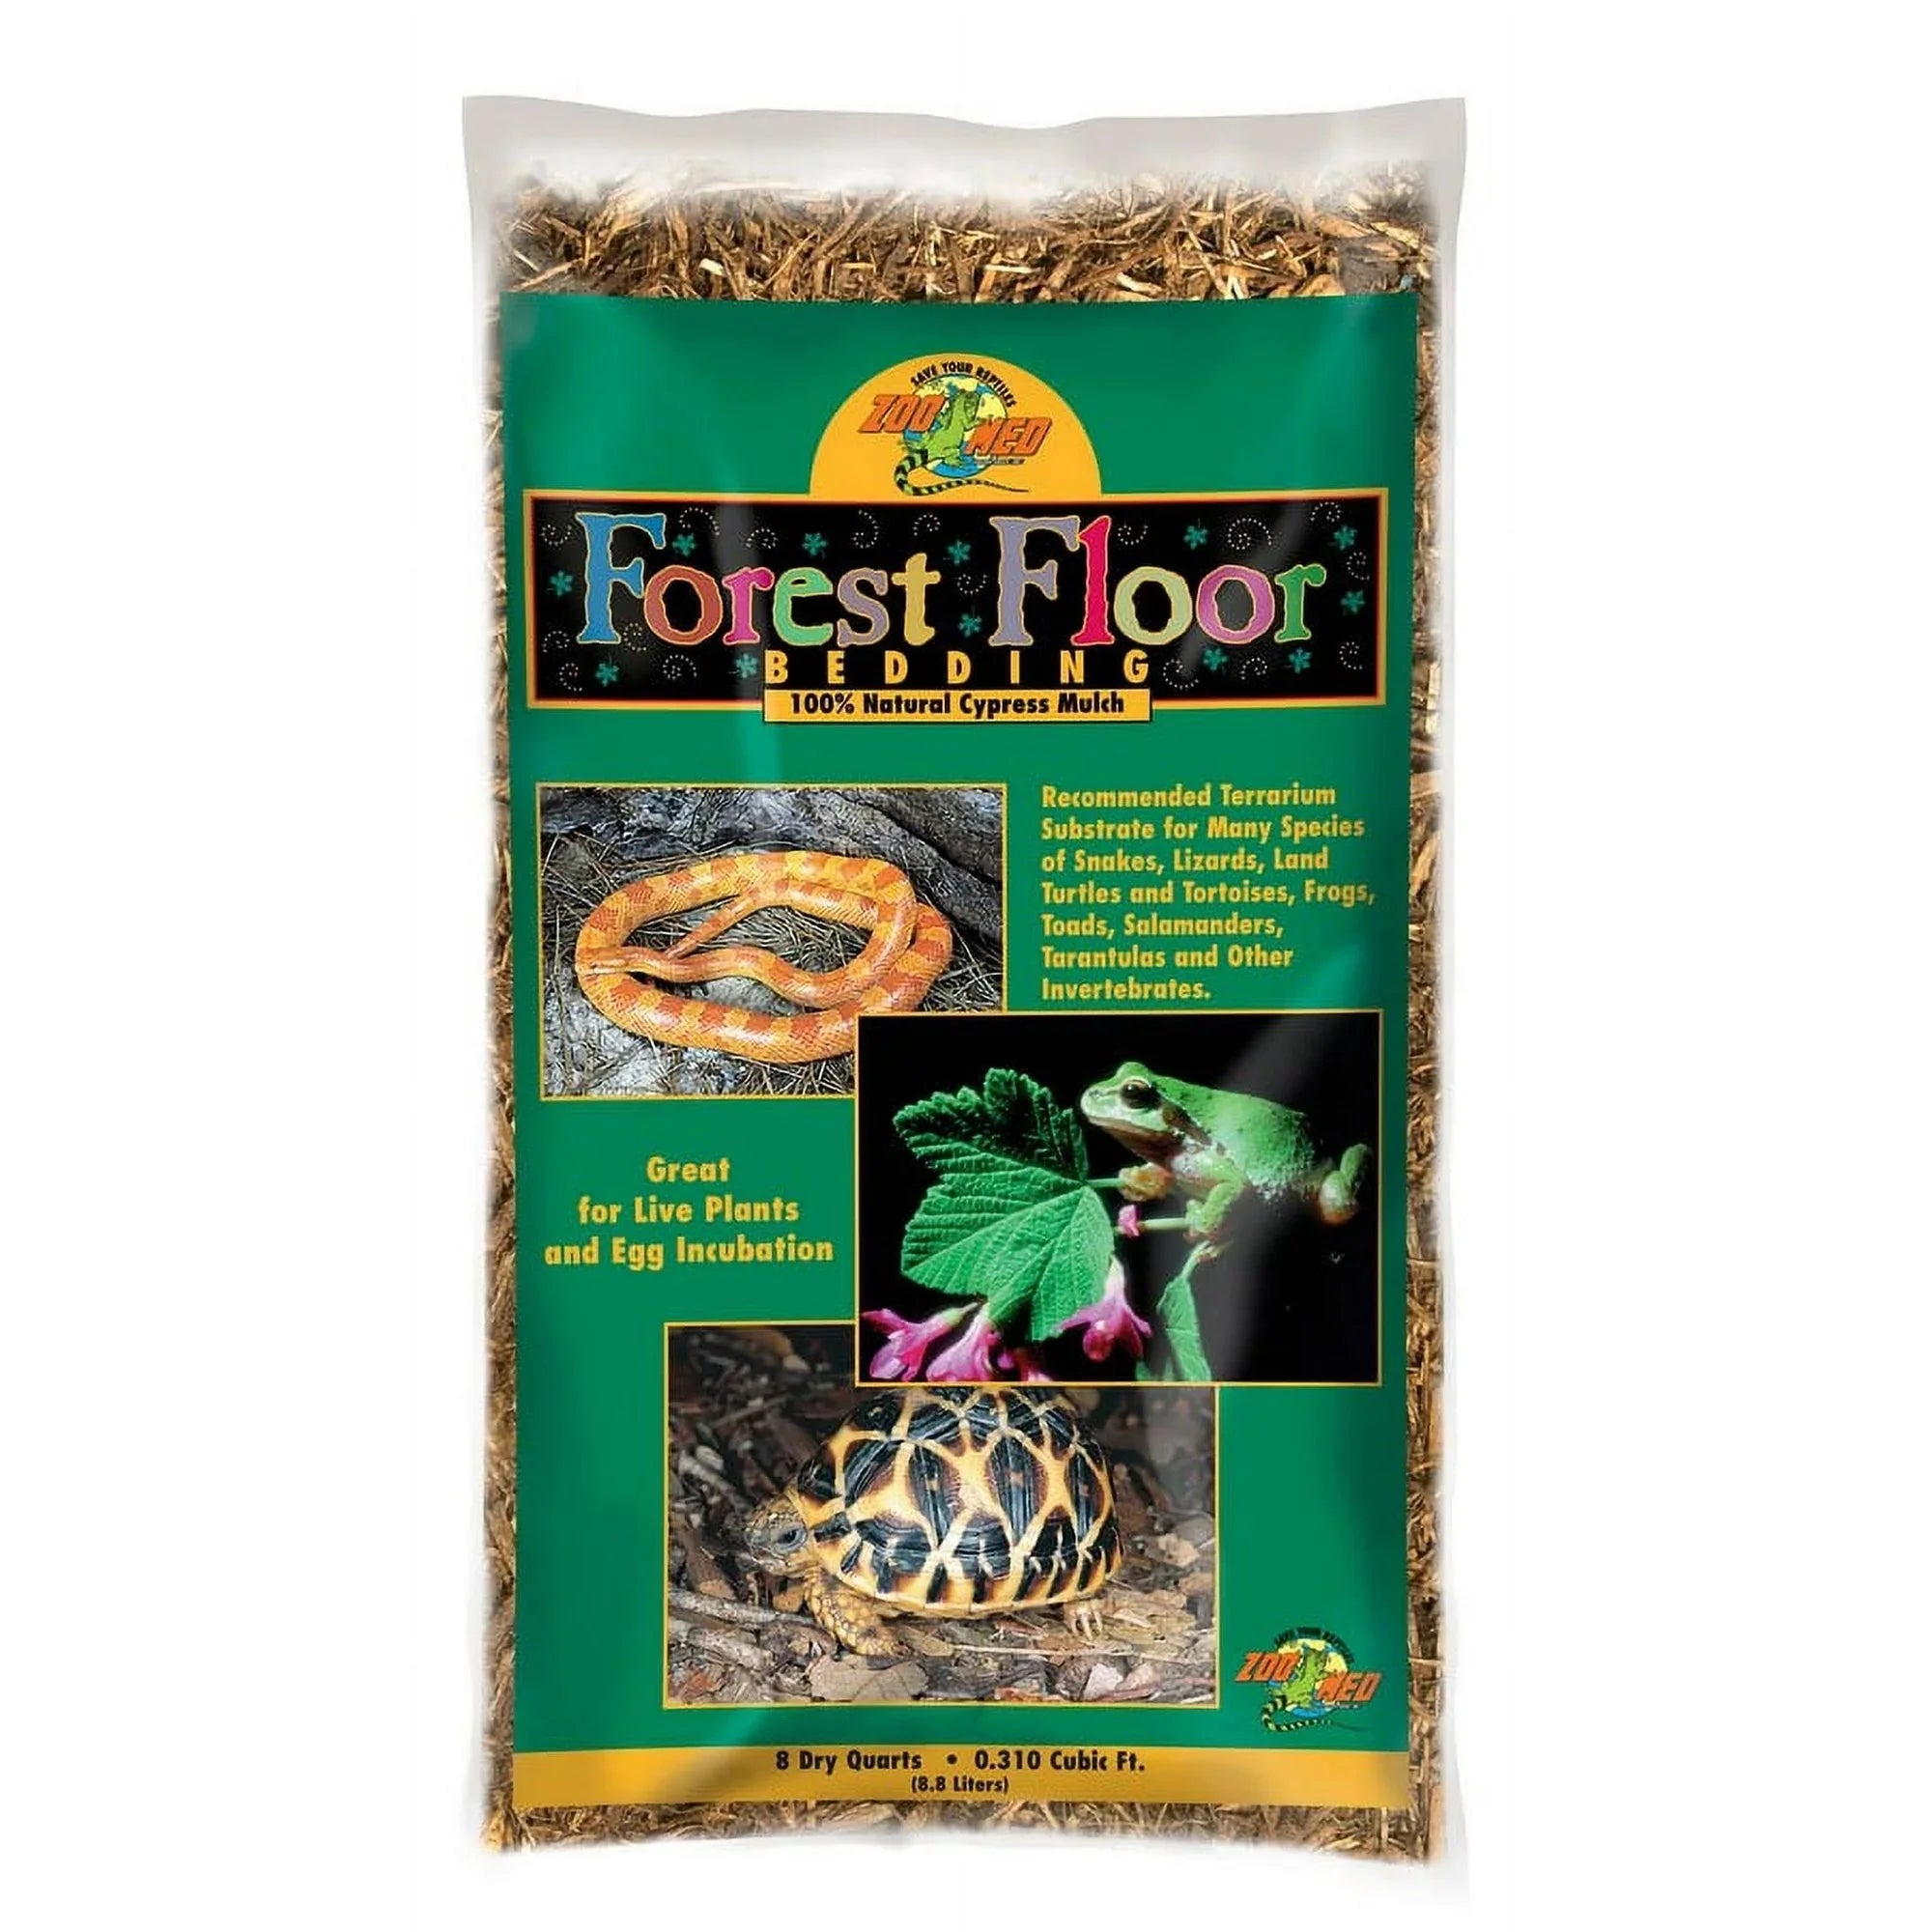 Wholesale prices with free shipping all over United States Zoo Med Laboratories Forest Floor��� Natural Cypress Mulch Substrate Bedding 8 Quartz - Steven Deals